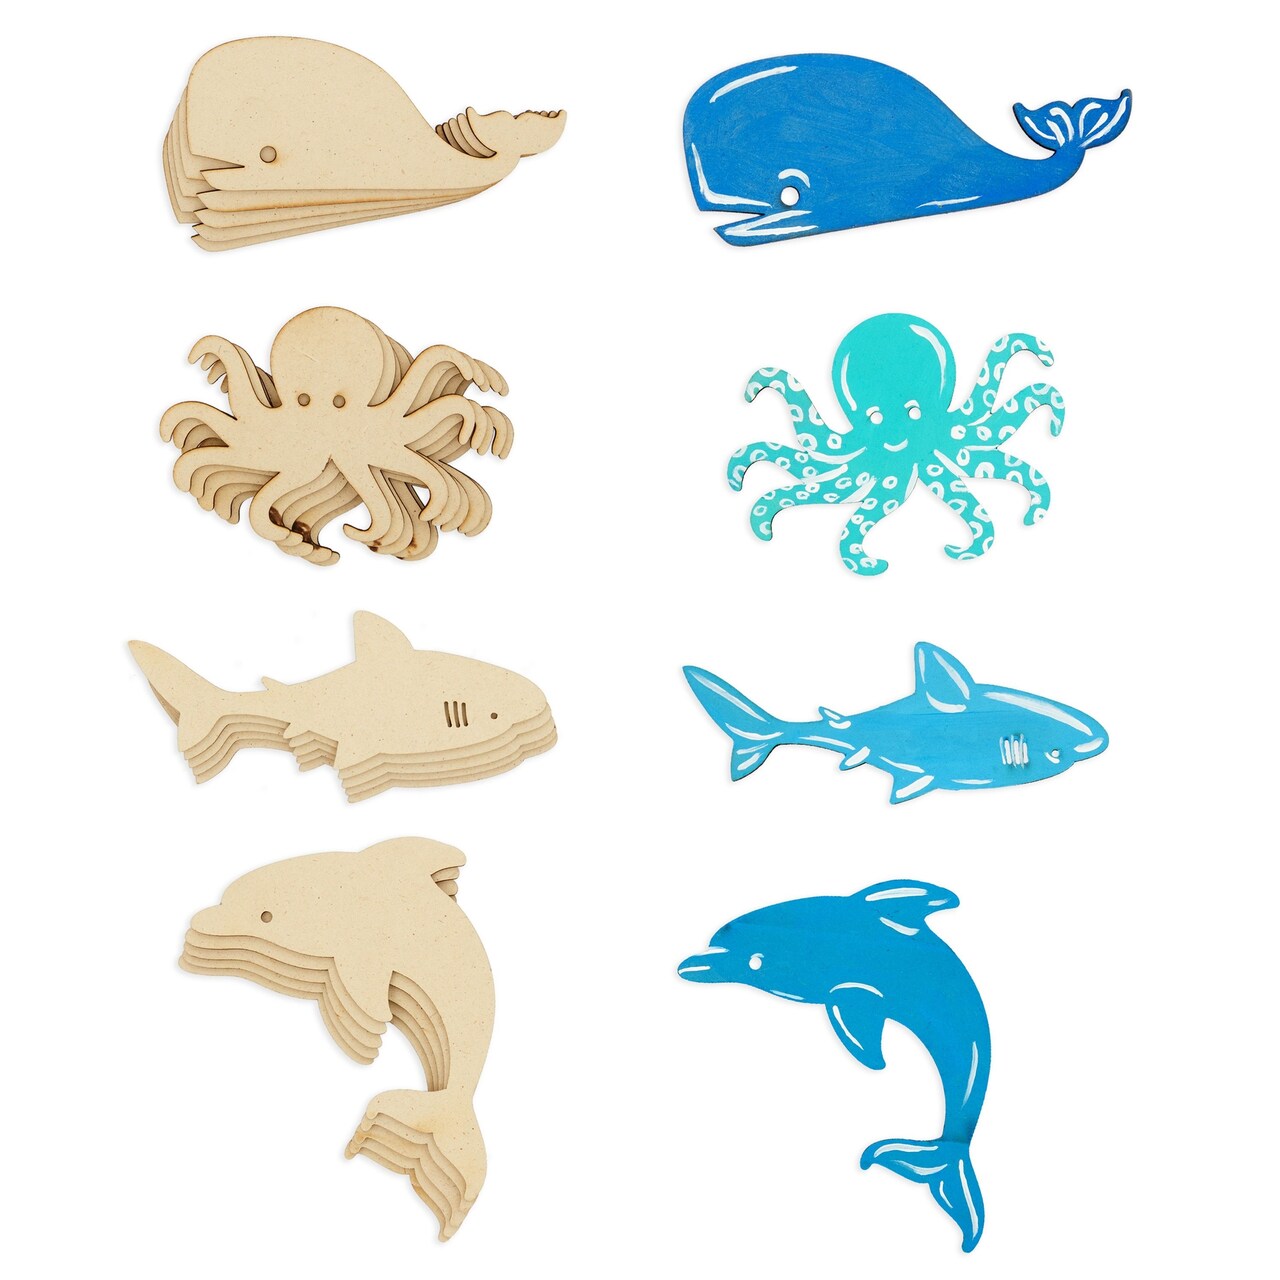 24 Pieces Unfinished Sea Creatures Wood Cutouts for Crafts, Wooden Ocean Animals (Octopus, Shark, Whale, Dolphin)